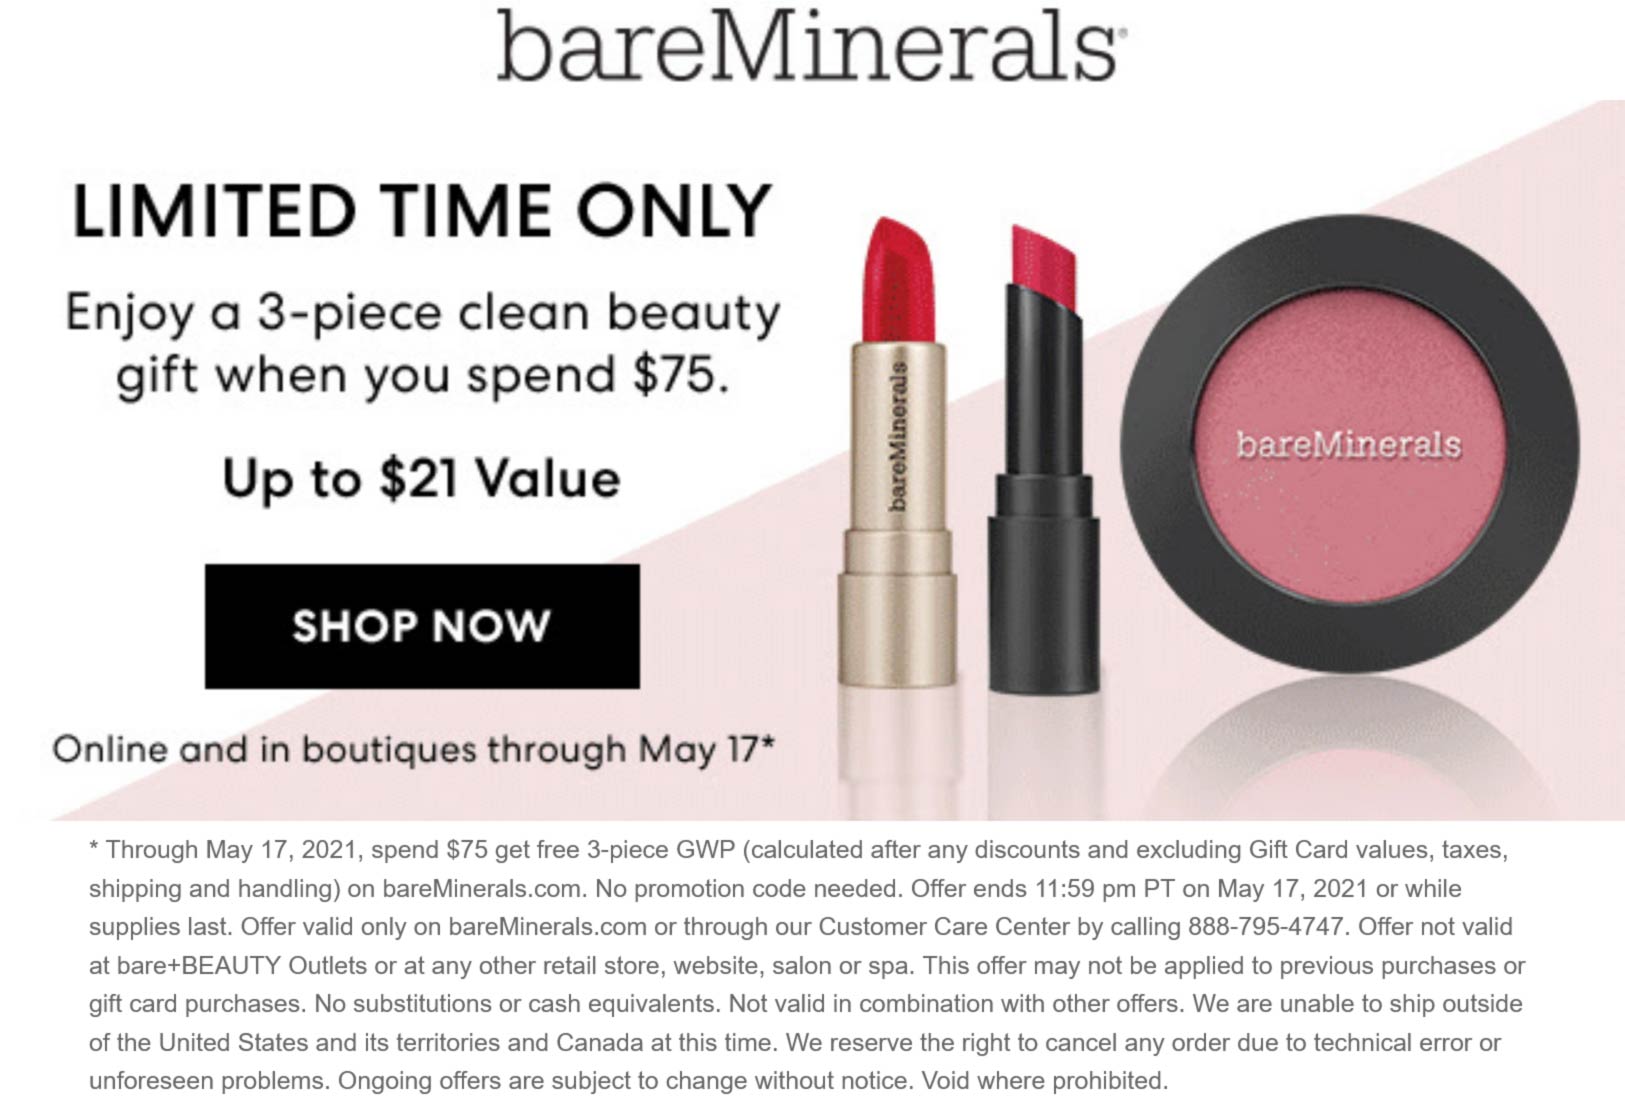 3pc 21 set free with 75 spent at bareMinerals, ditto online 